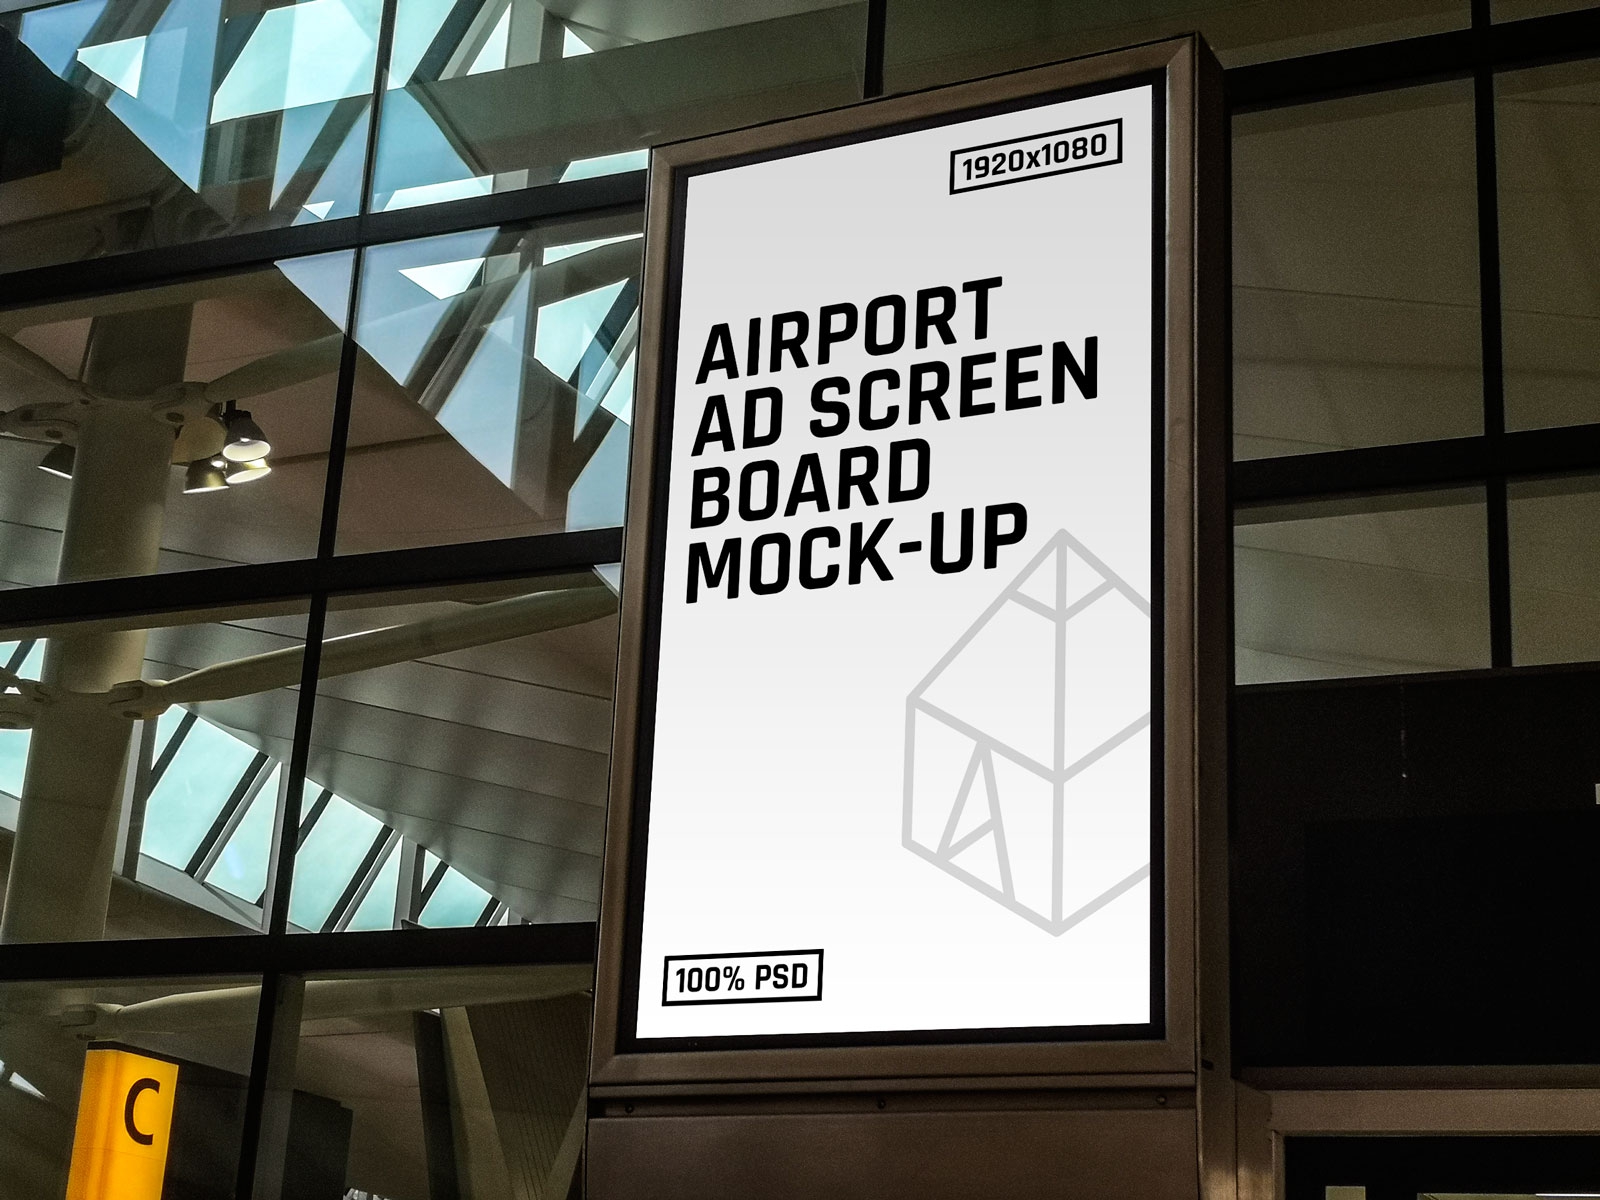 Download Airport Ad Screen Poster Mockup - Free Download